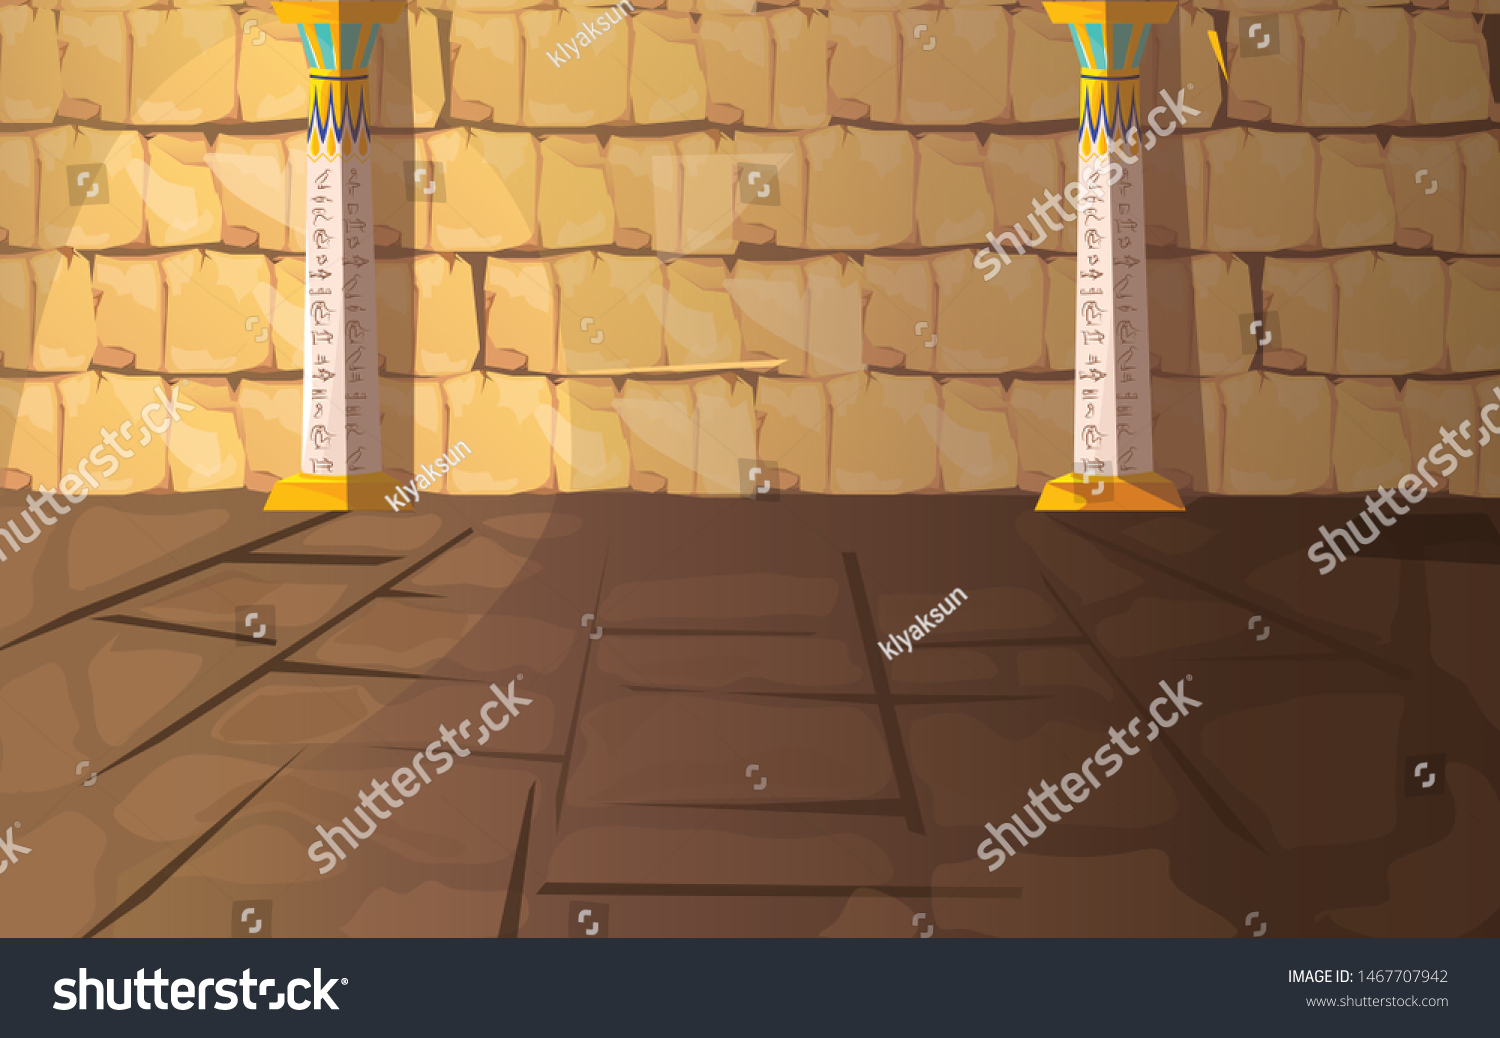 SVG of Ancient Egypt empty pharaoh tomb or temple room cartoon vector illustration. Egyptian pyramid interior with hieroglyphs on stone walls and white columns with oranment, background for game design svg